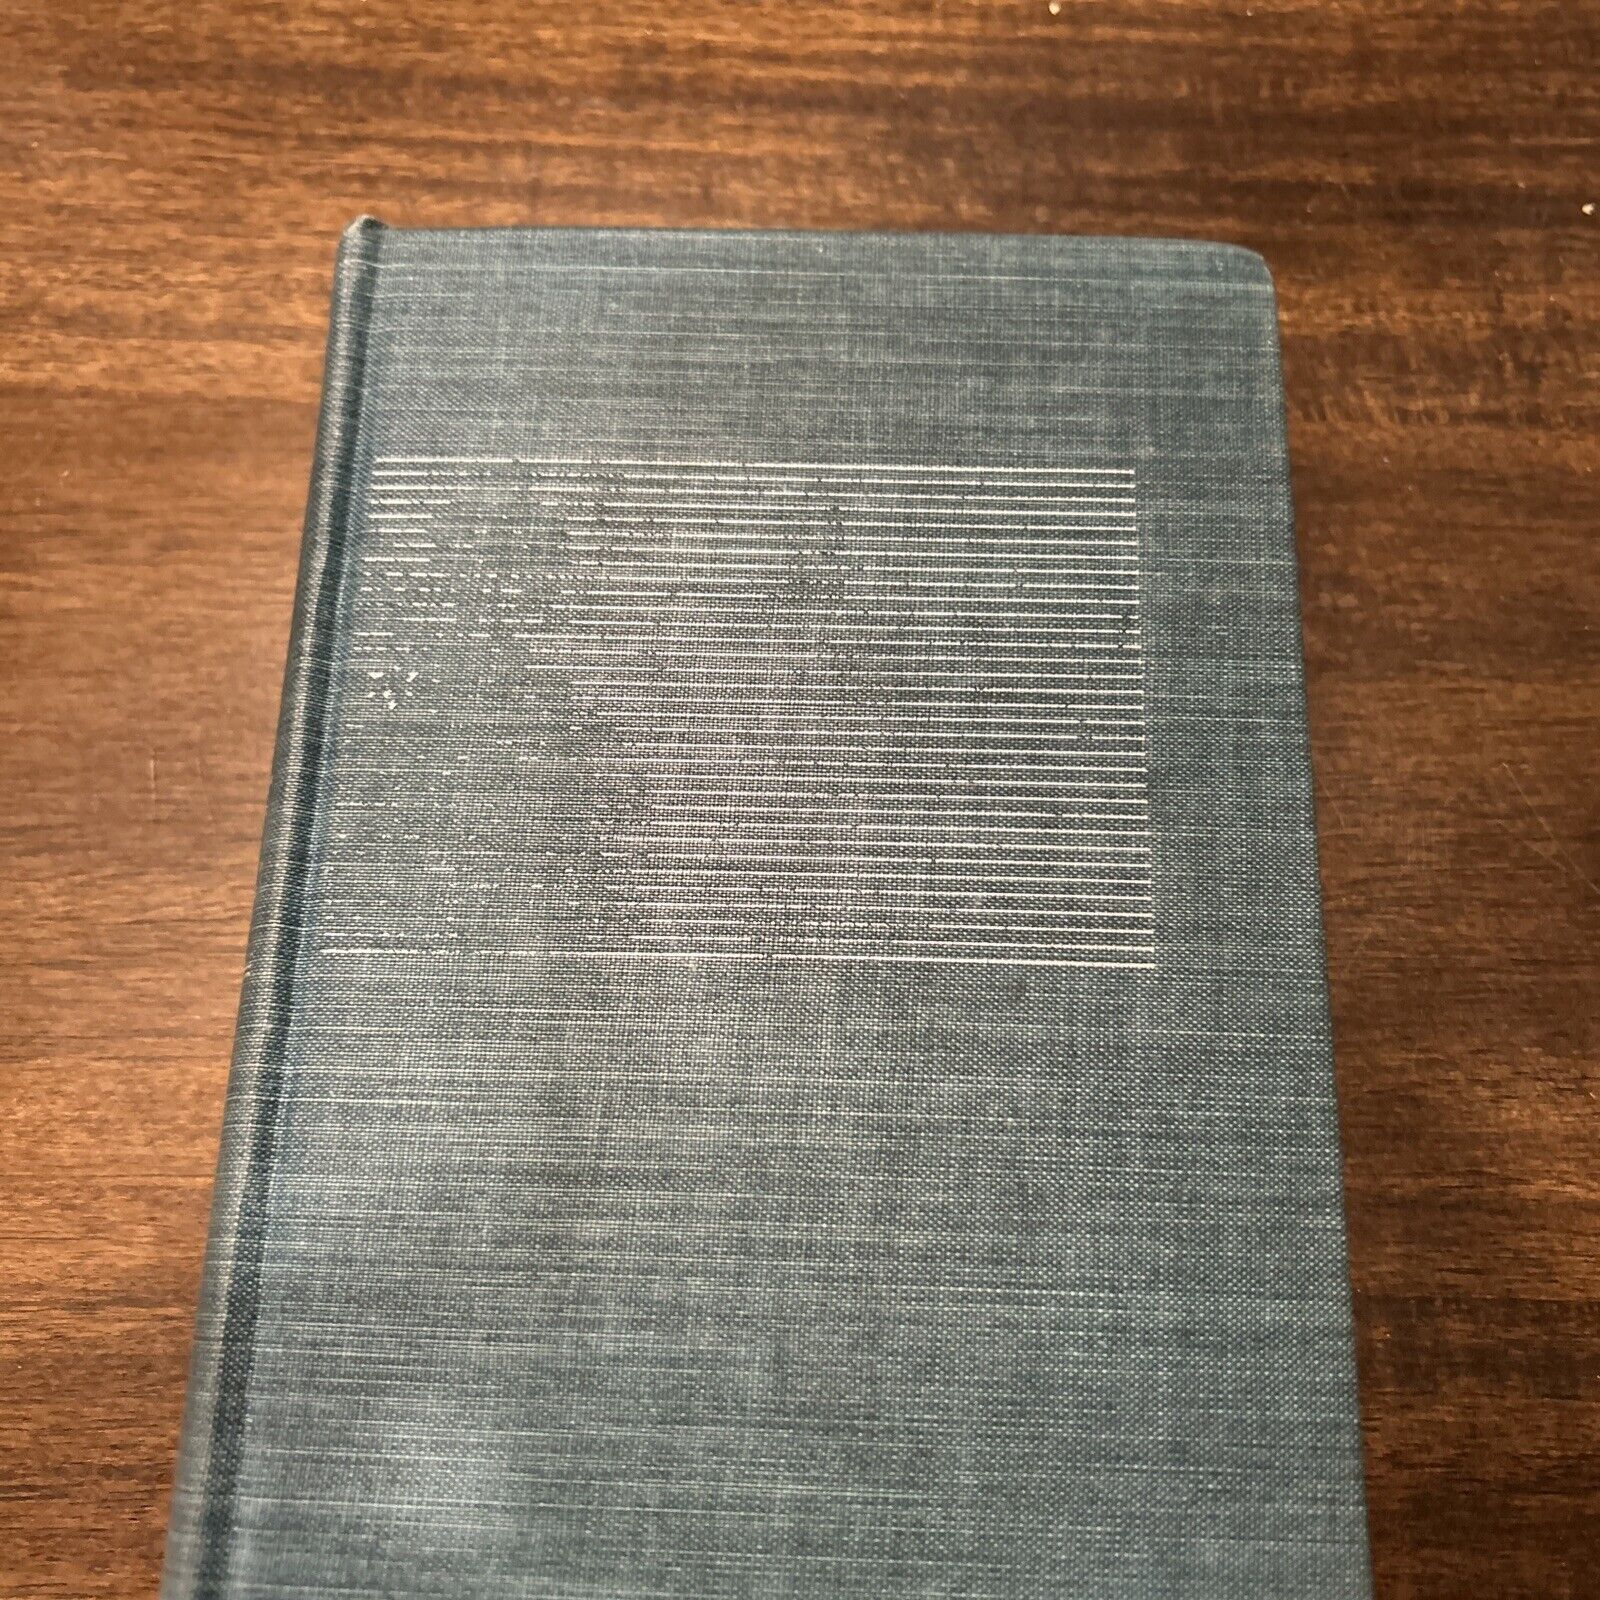 1936 Some Aspects of Rabbinic Theology SOLOMON SCHECHTER